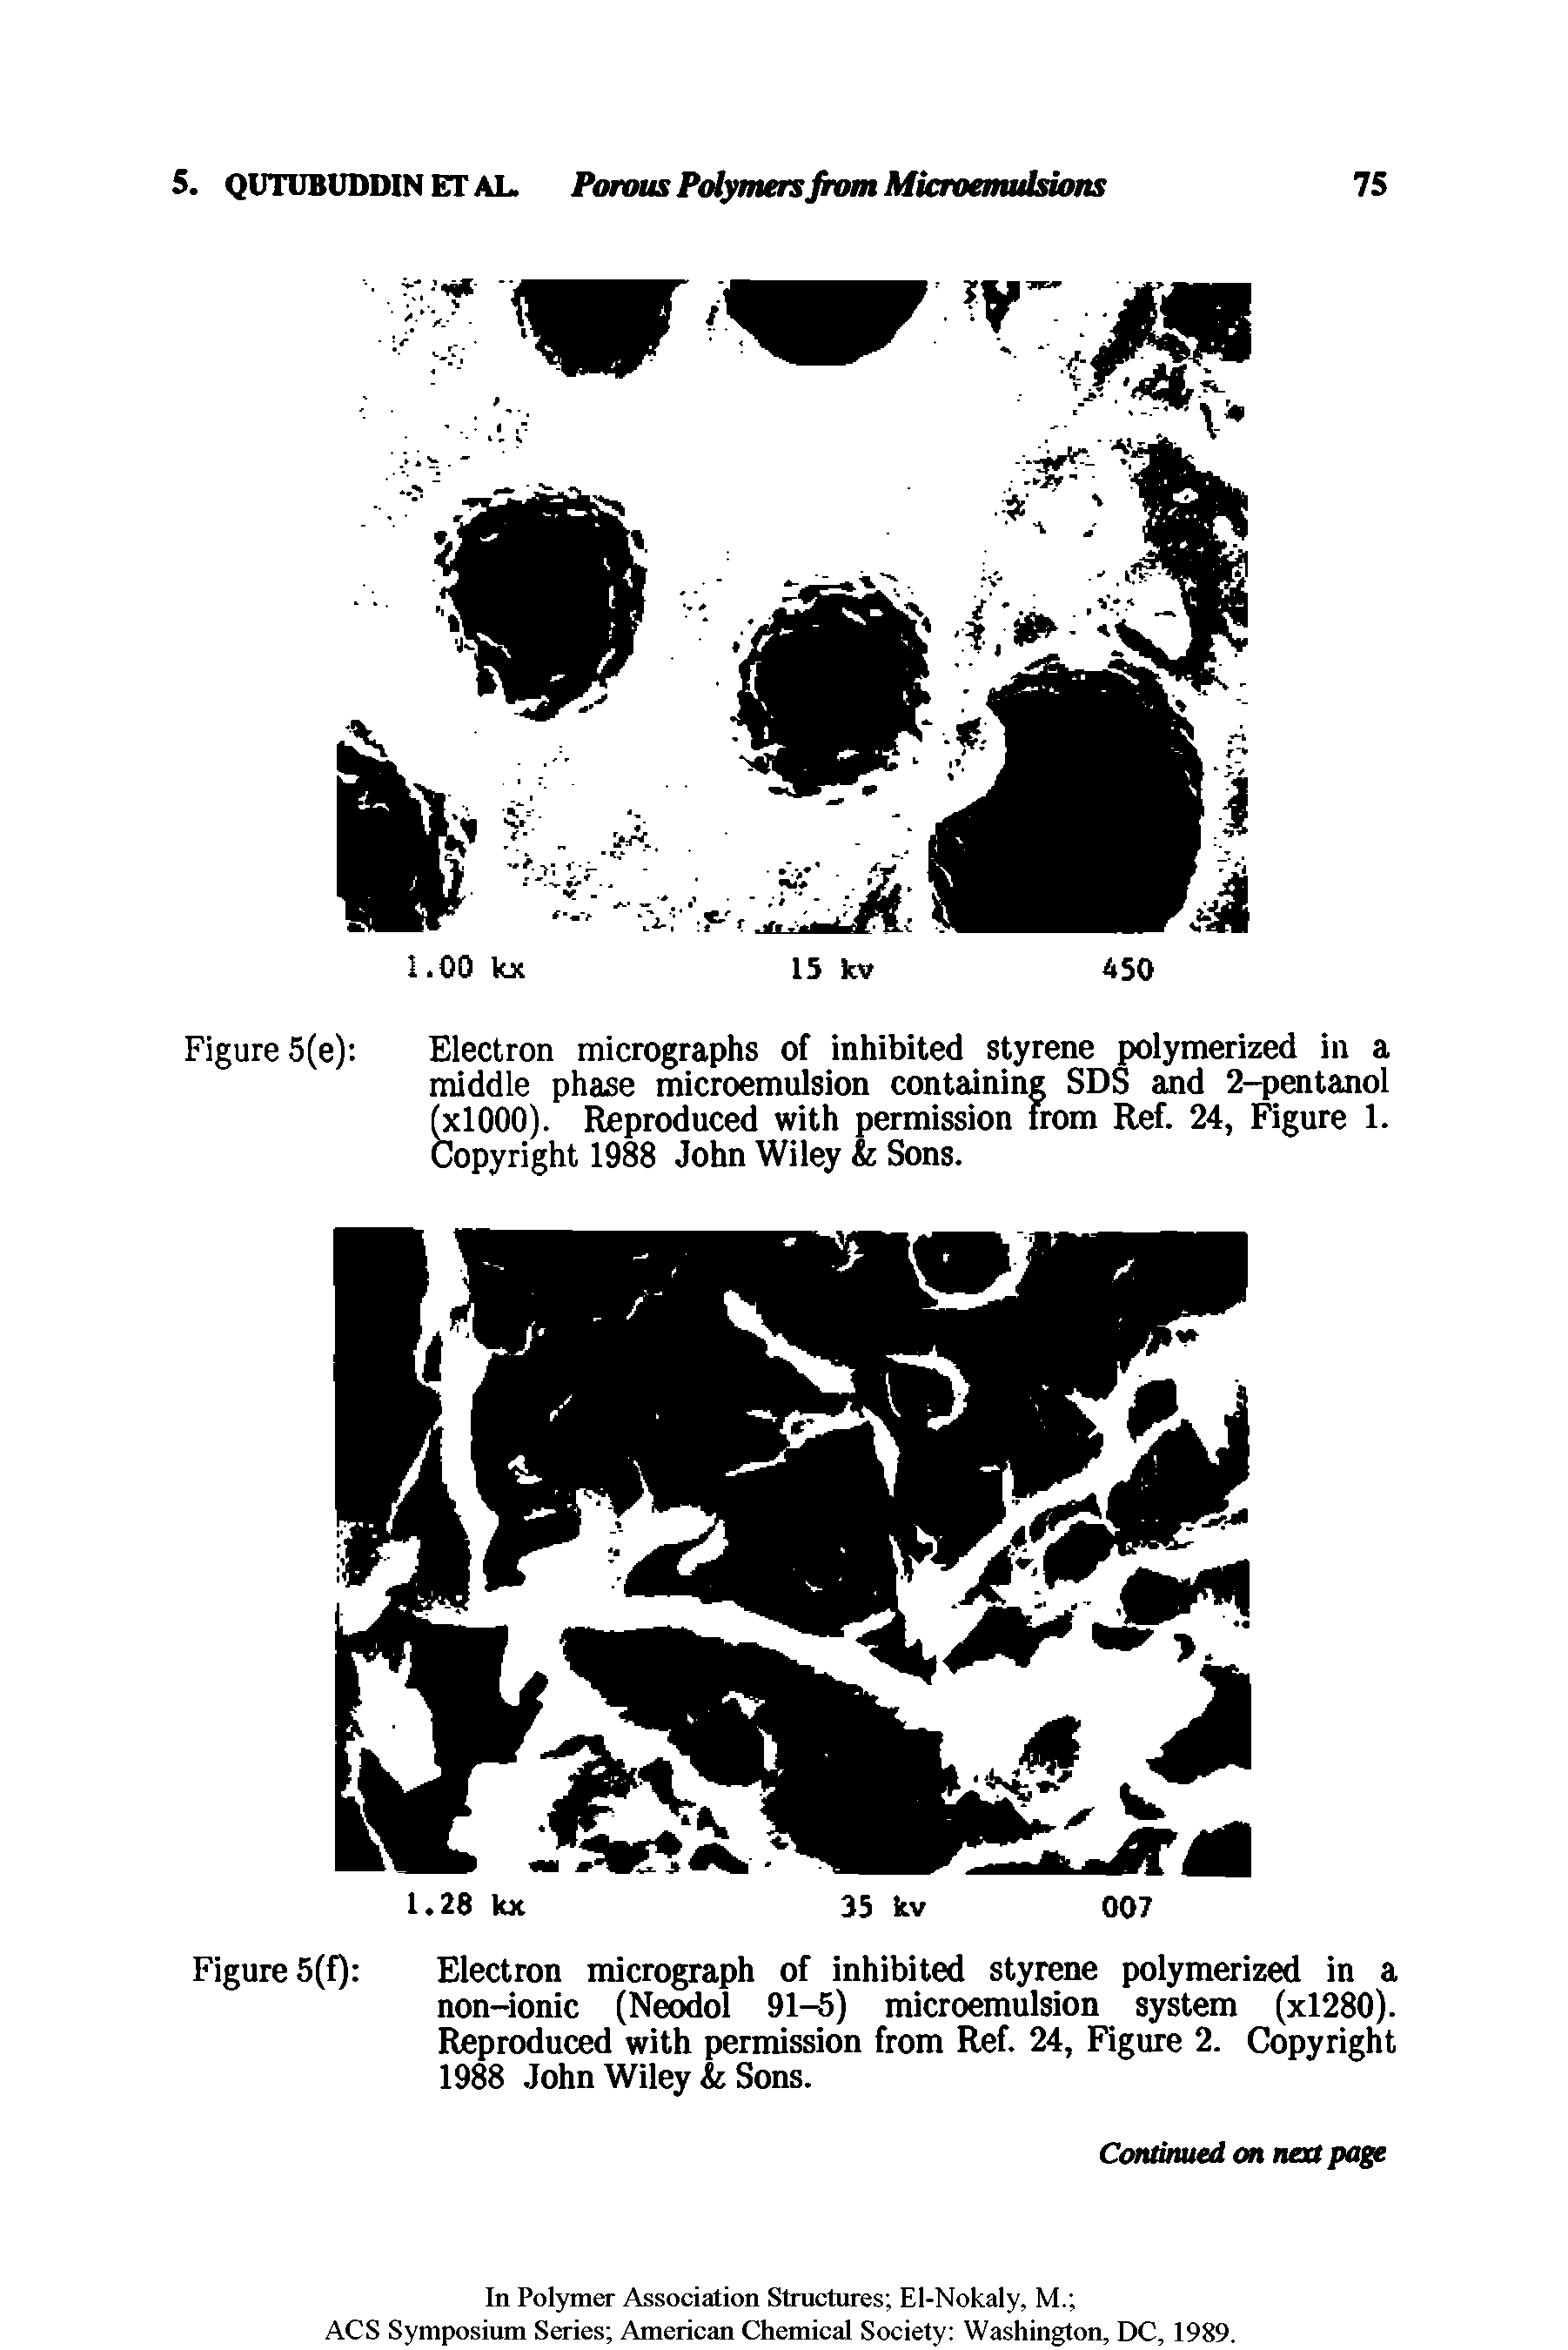 Figure 5(e) Electron micrographs of inhibited styrene polymerized in a middle phase microemulsion containing SDS and 2-pentanol (xlOOO). Reproduced with permission from Ref. 24, Figure 1. Copyright 1988 John Wiley Sons.